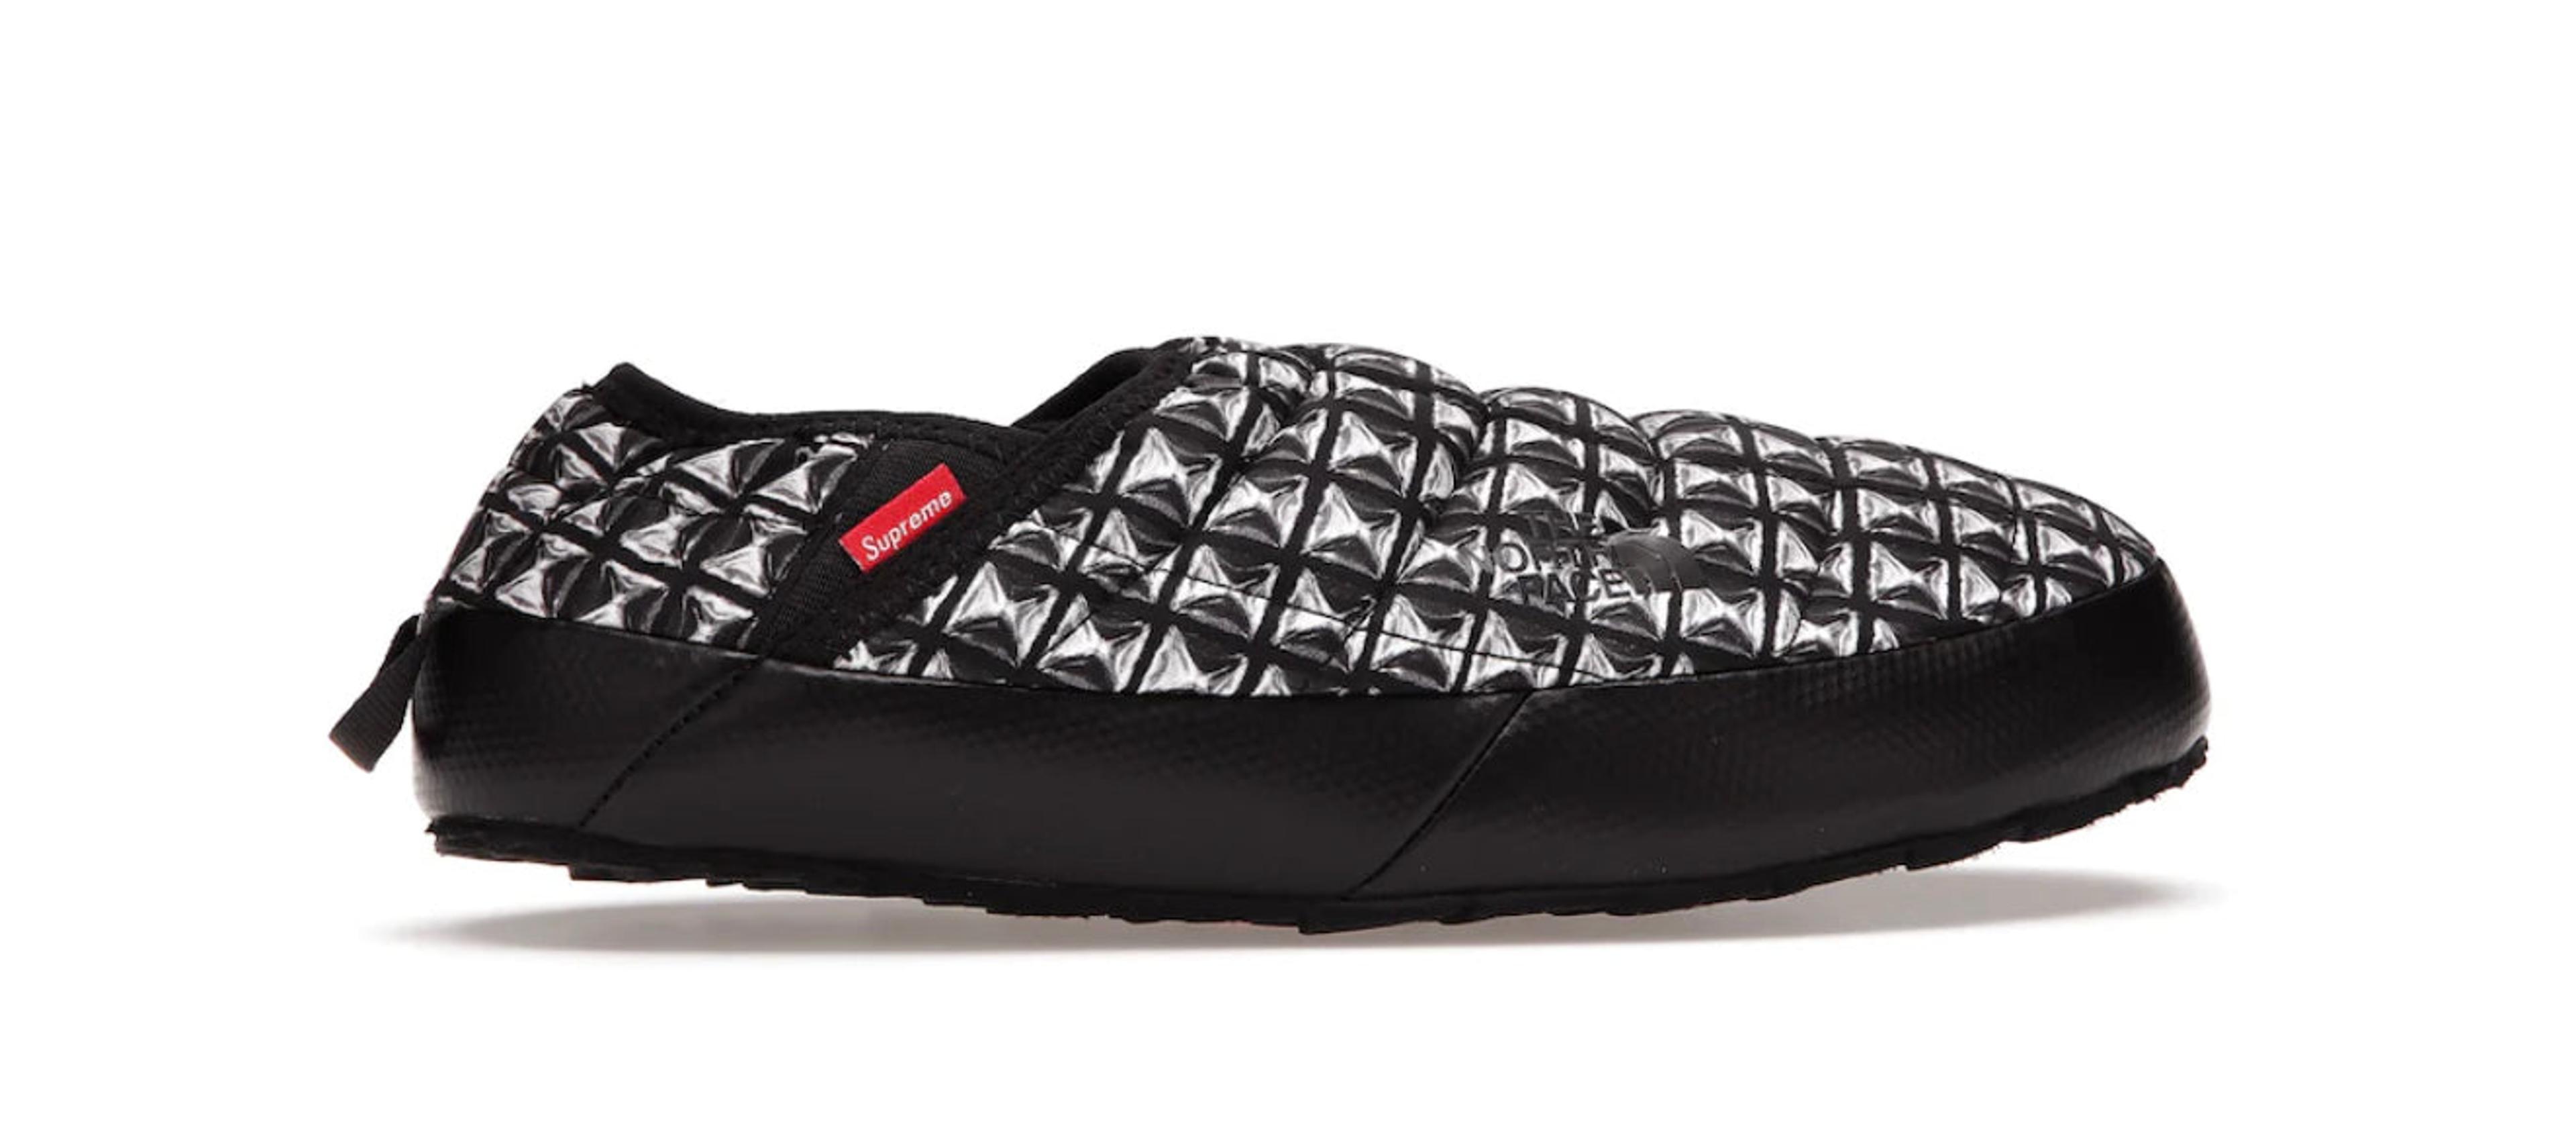 Alternate View 1 of The North Face Thermoball Traction Mule “Supreme Black”